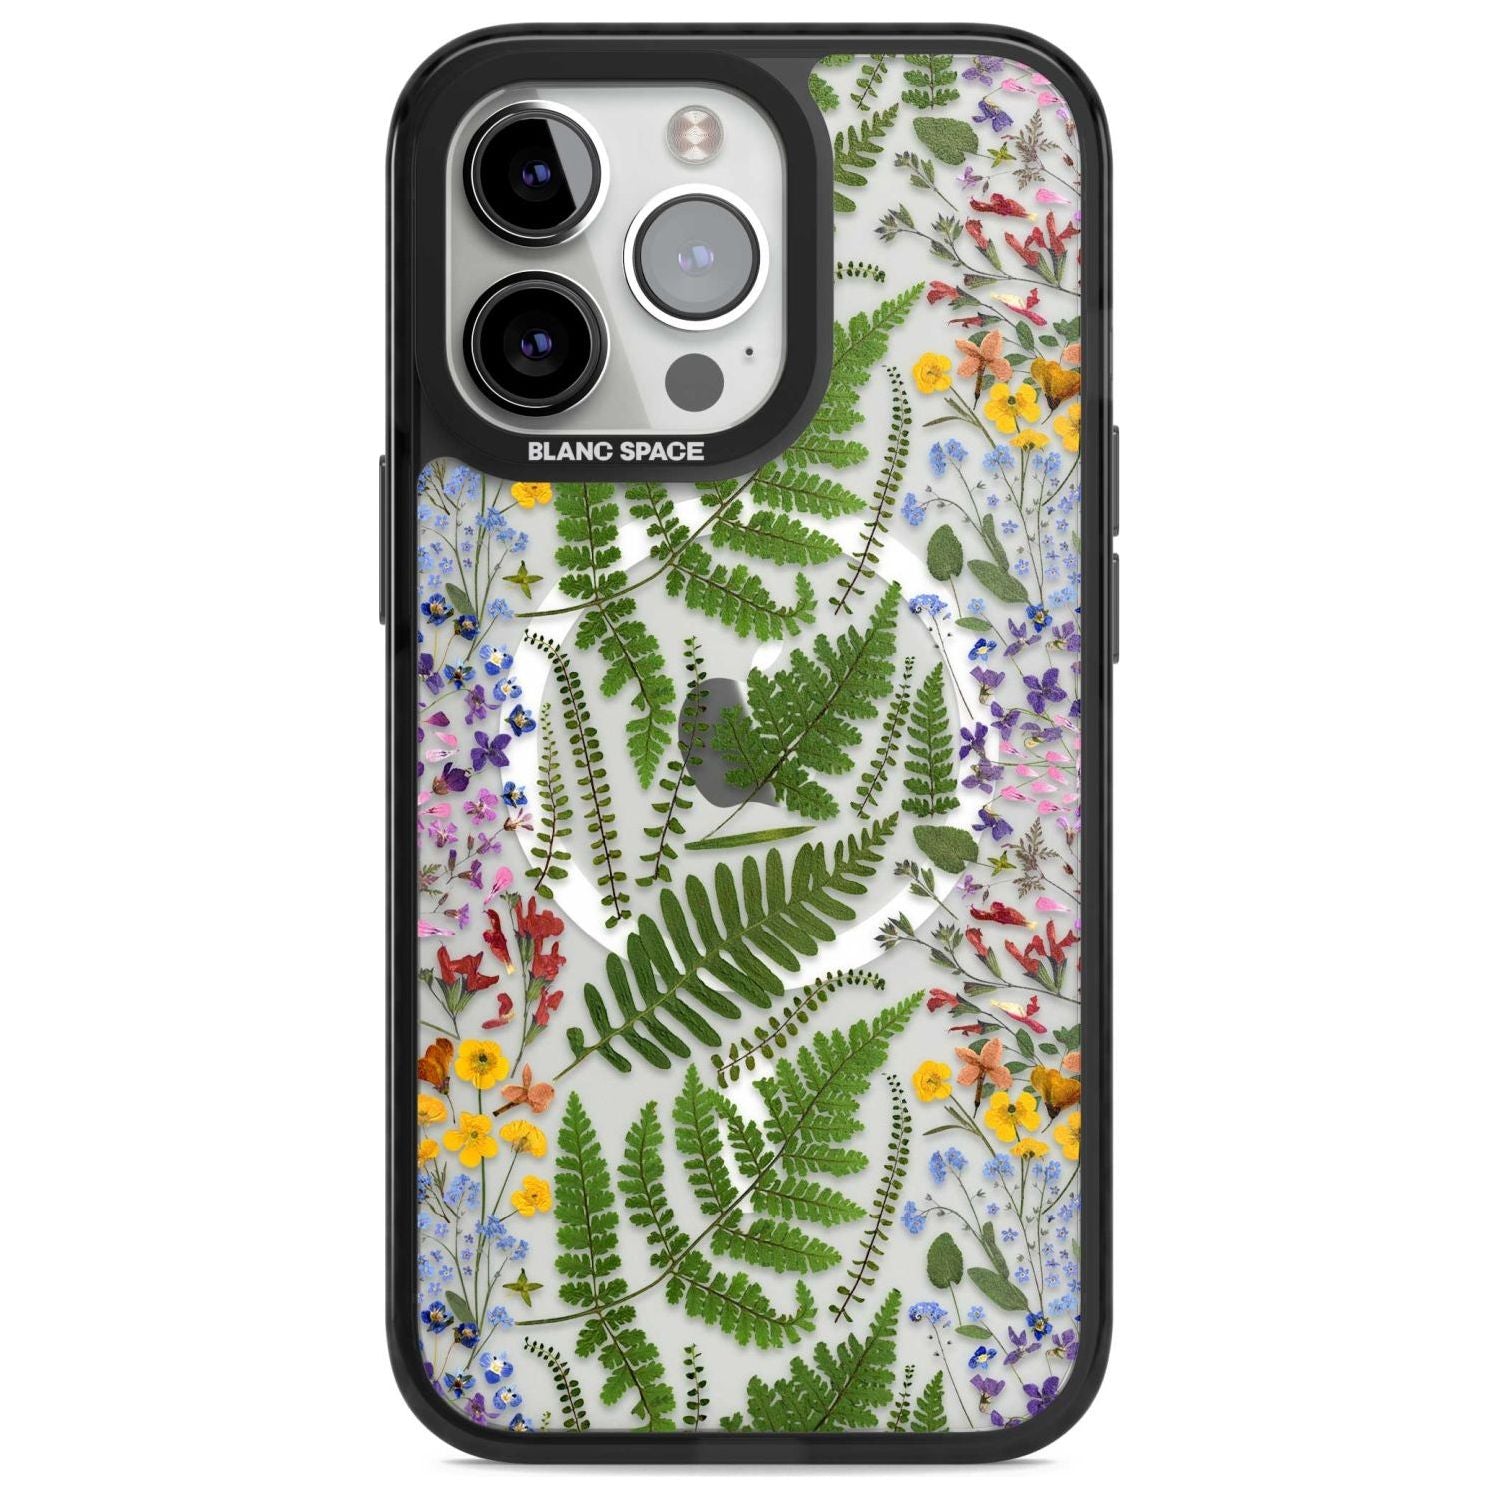 Busy Floral and Fern Design Phone Case iPhone 15 Pro Max / Magsafe Black Impact Case,iPhone 15 Pro / Magsafe Black Impact Case,iPhone 14 Pro Max / Magsafe Black Impact Case,iPhone 14 Pro / Magsafe Black Impact Case,iPhone 13 Pro / Magsafe Black Impact Case Blanc Space